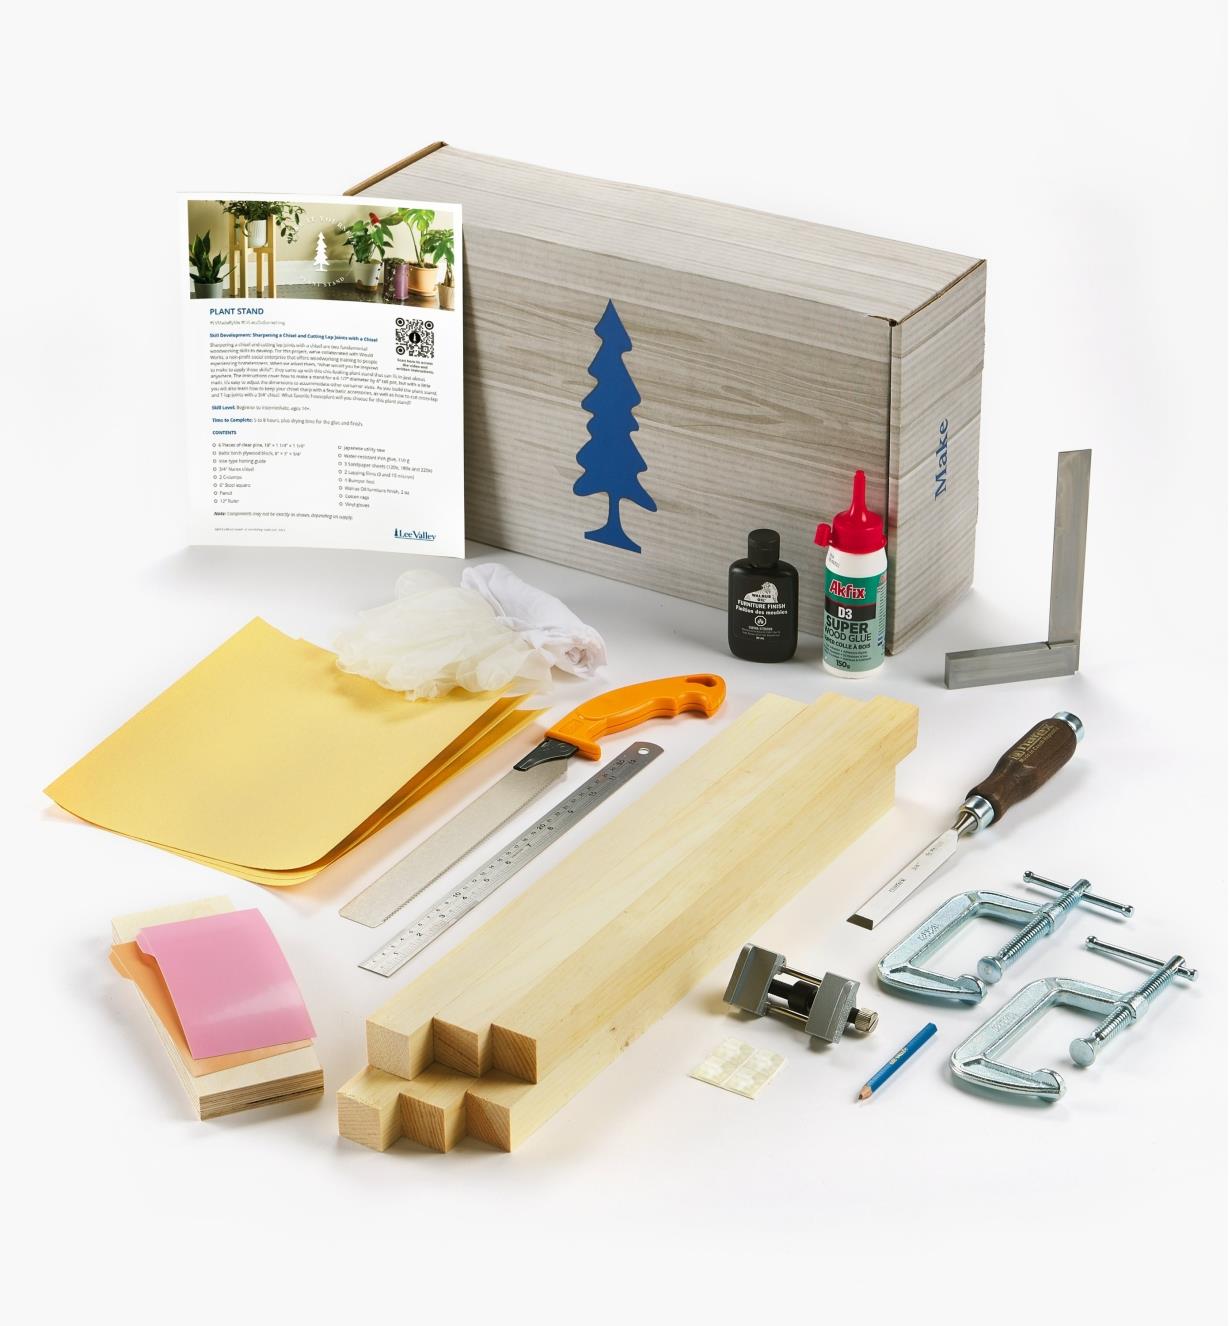 Components of the MIY plant stand kit